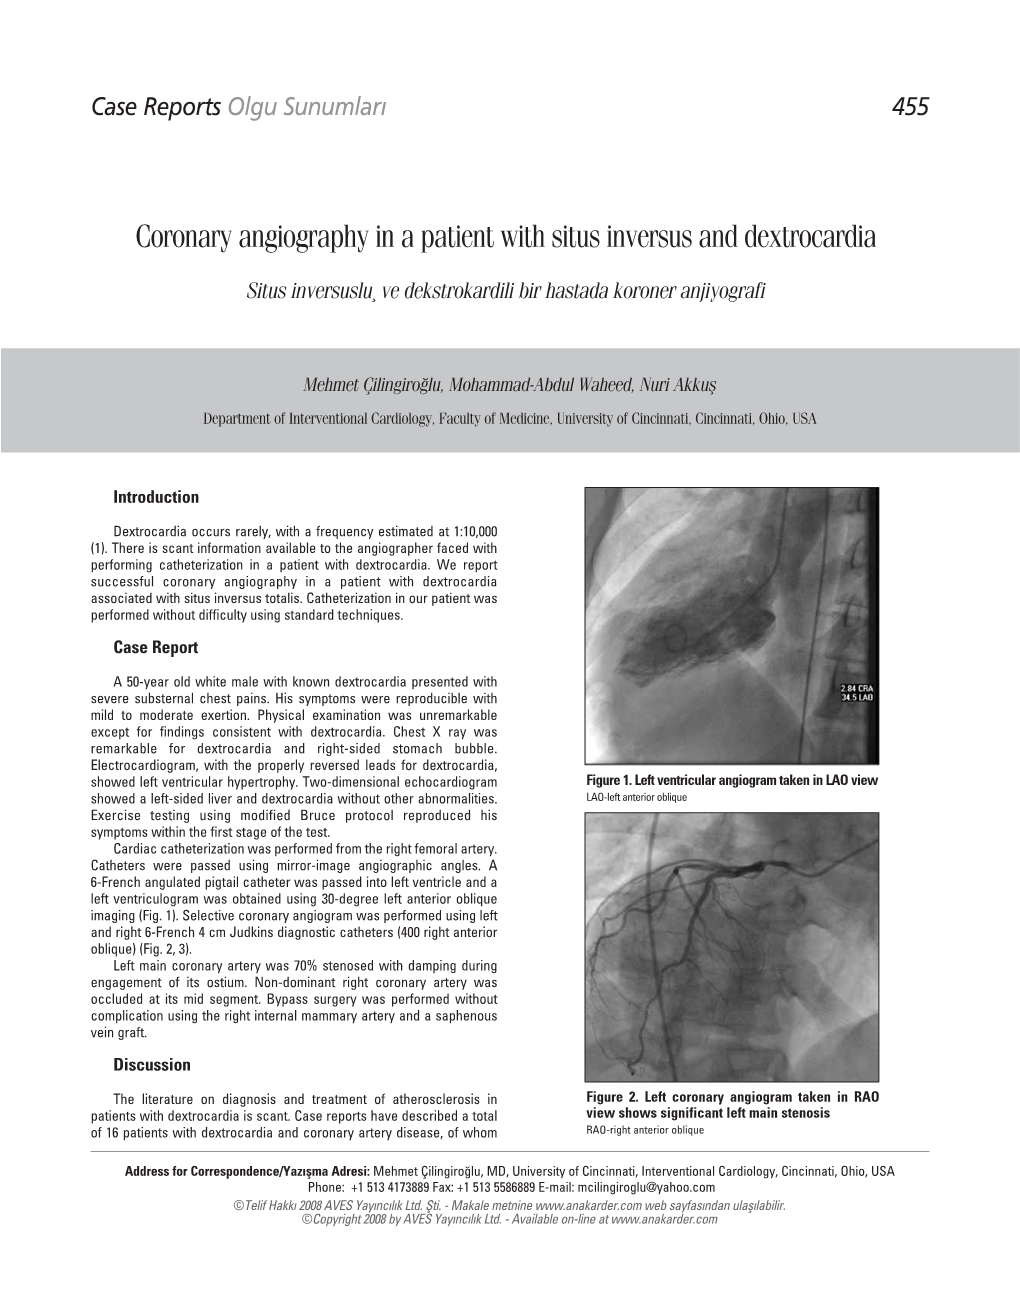 Coronary Angiography in a Patient with Situs Inversus and Dextrocardia